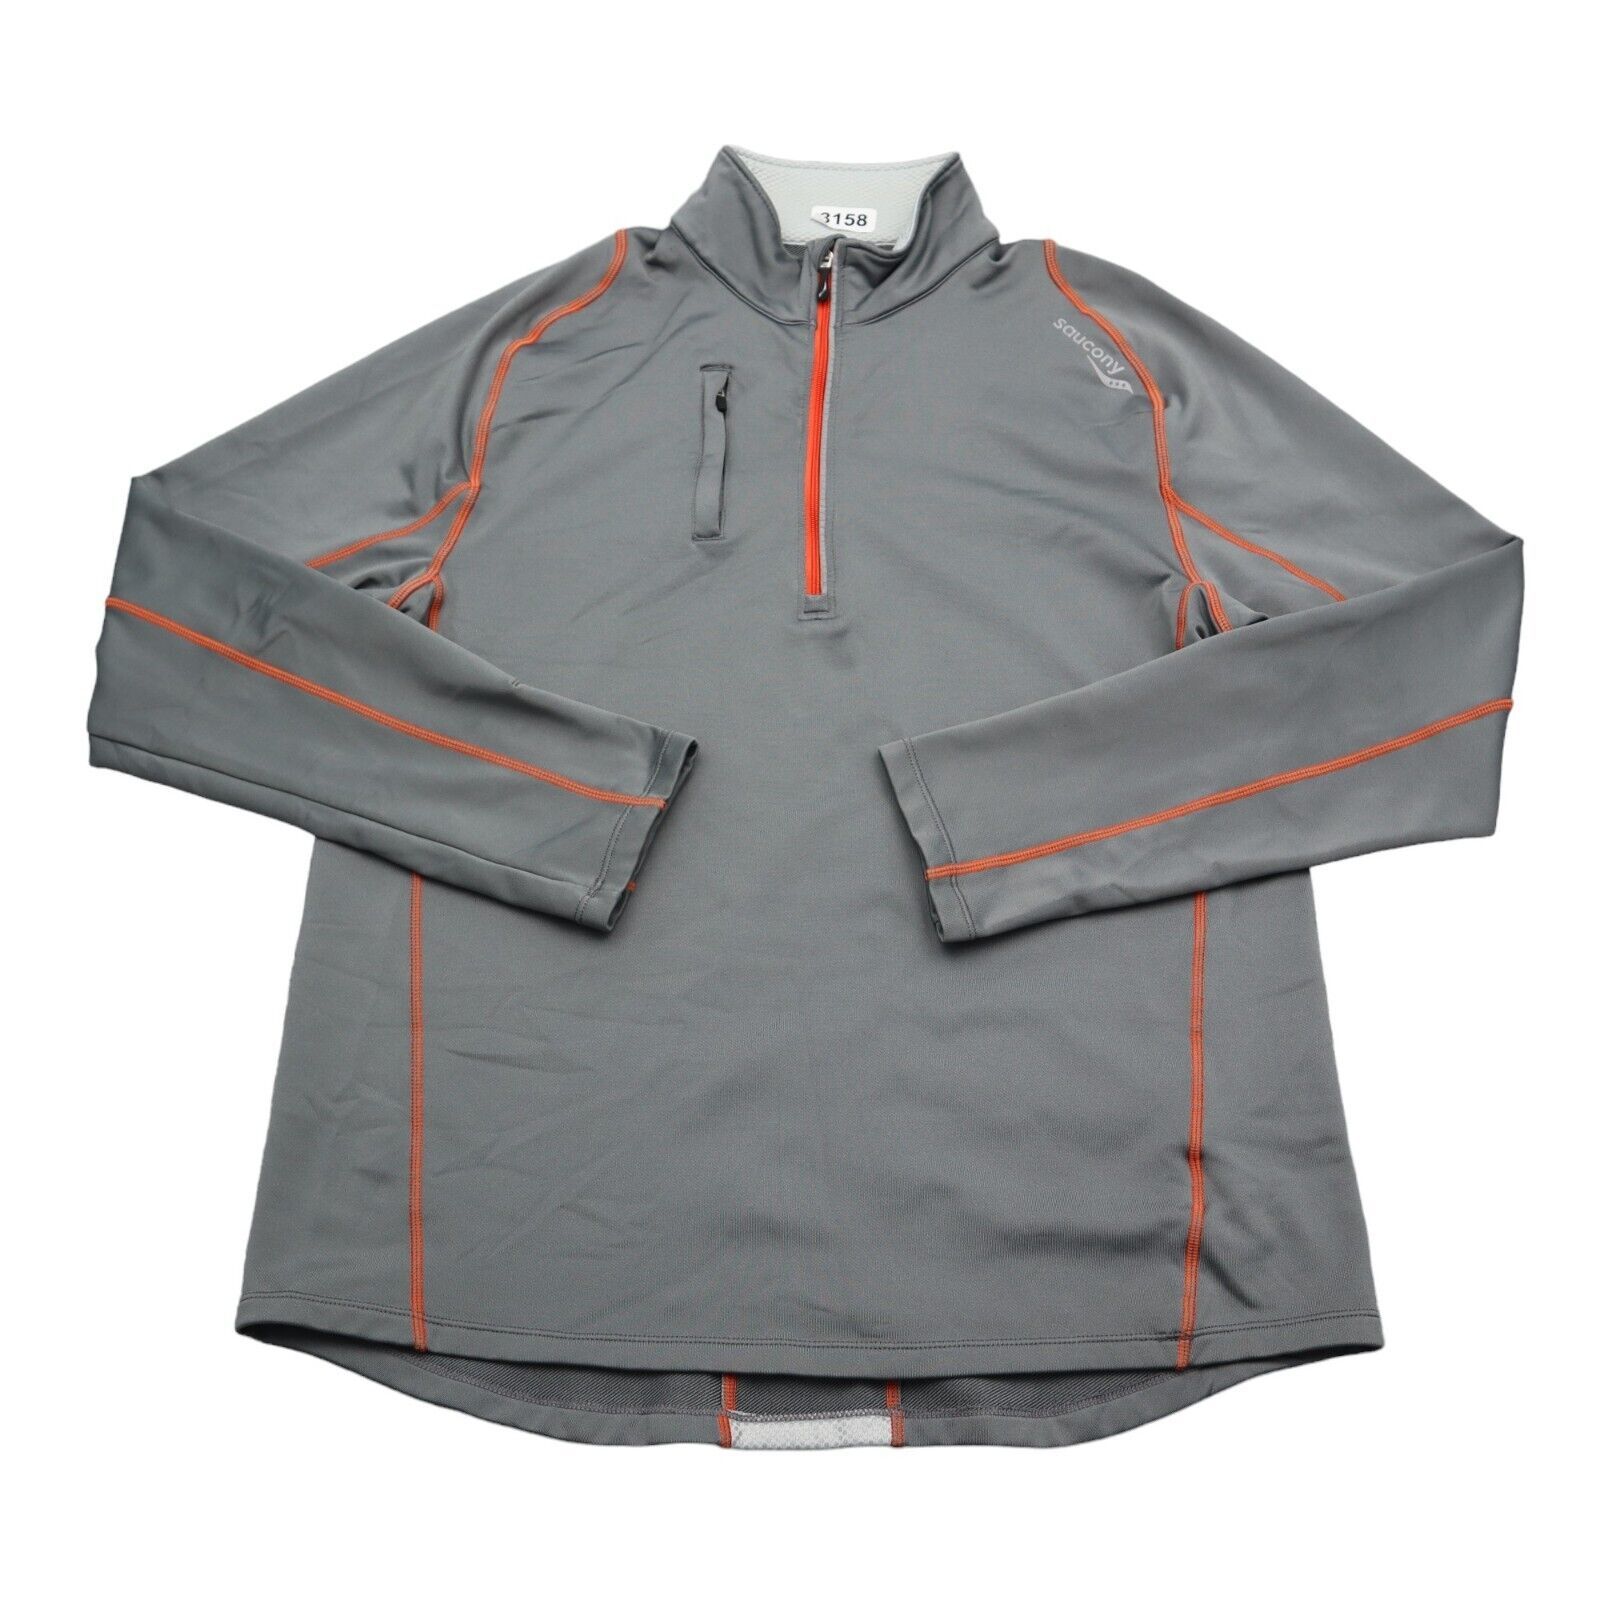 Primary image for Saucony Jacket Mens Small Gray Orange Running Workout 1/4 Zip Coat Sweater Run